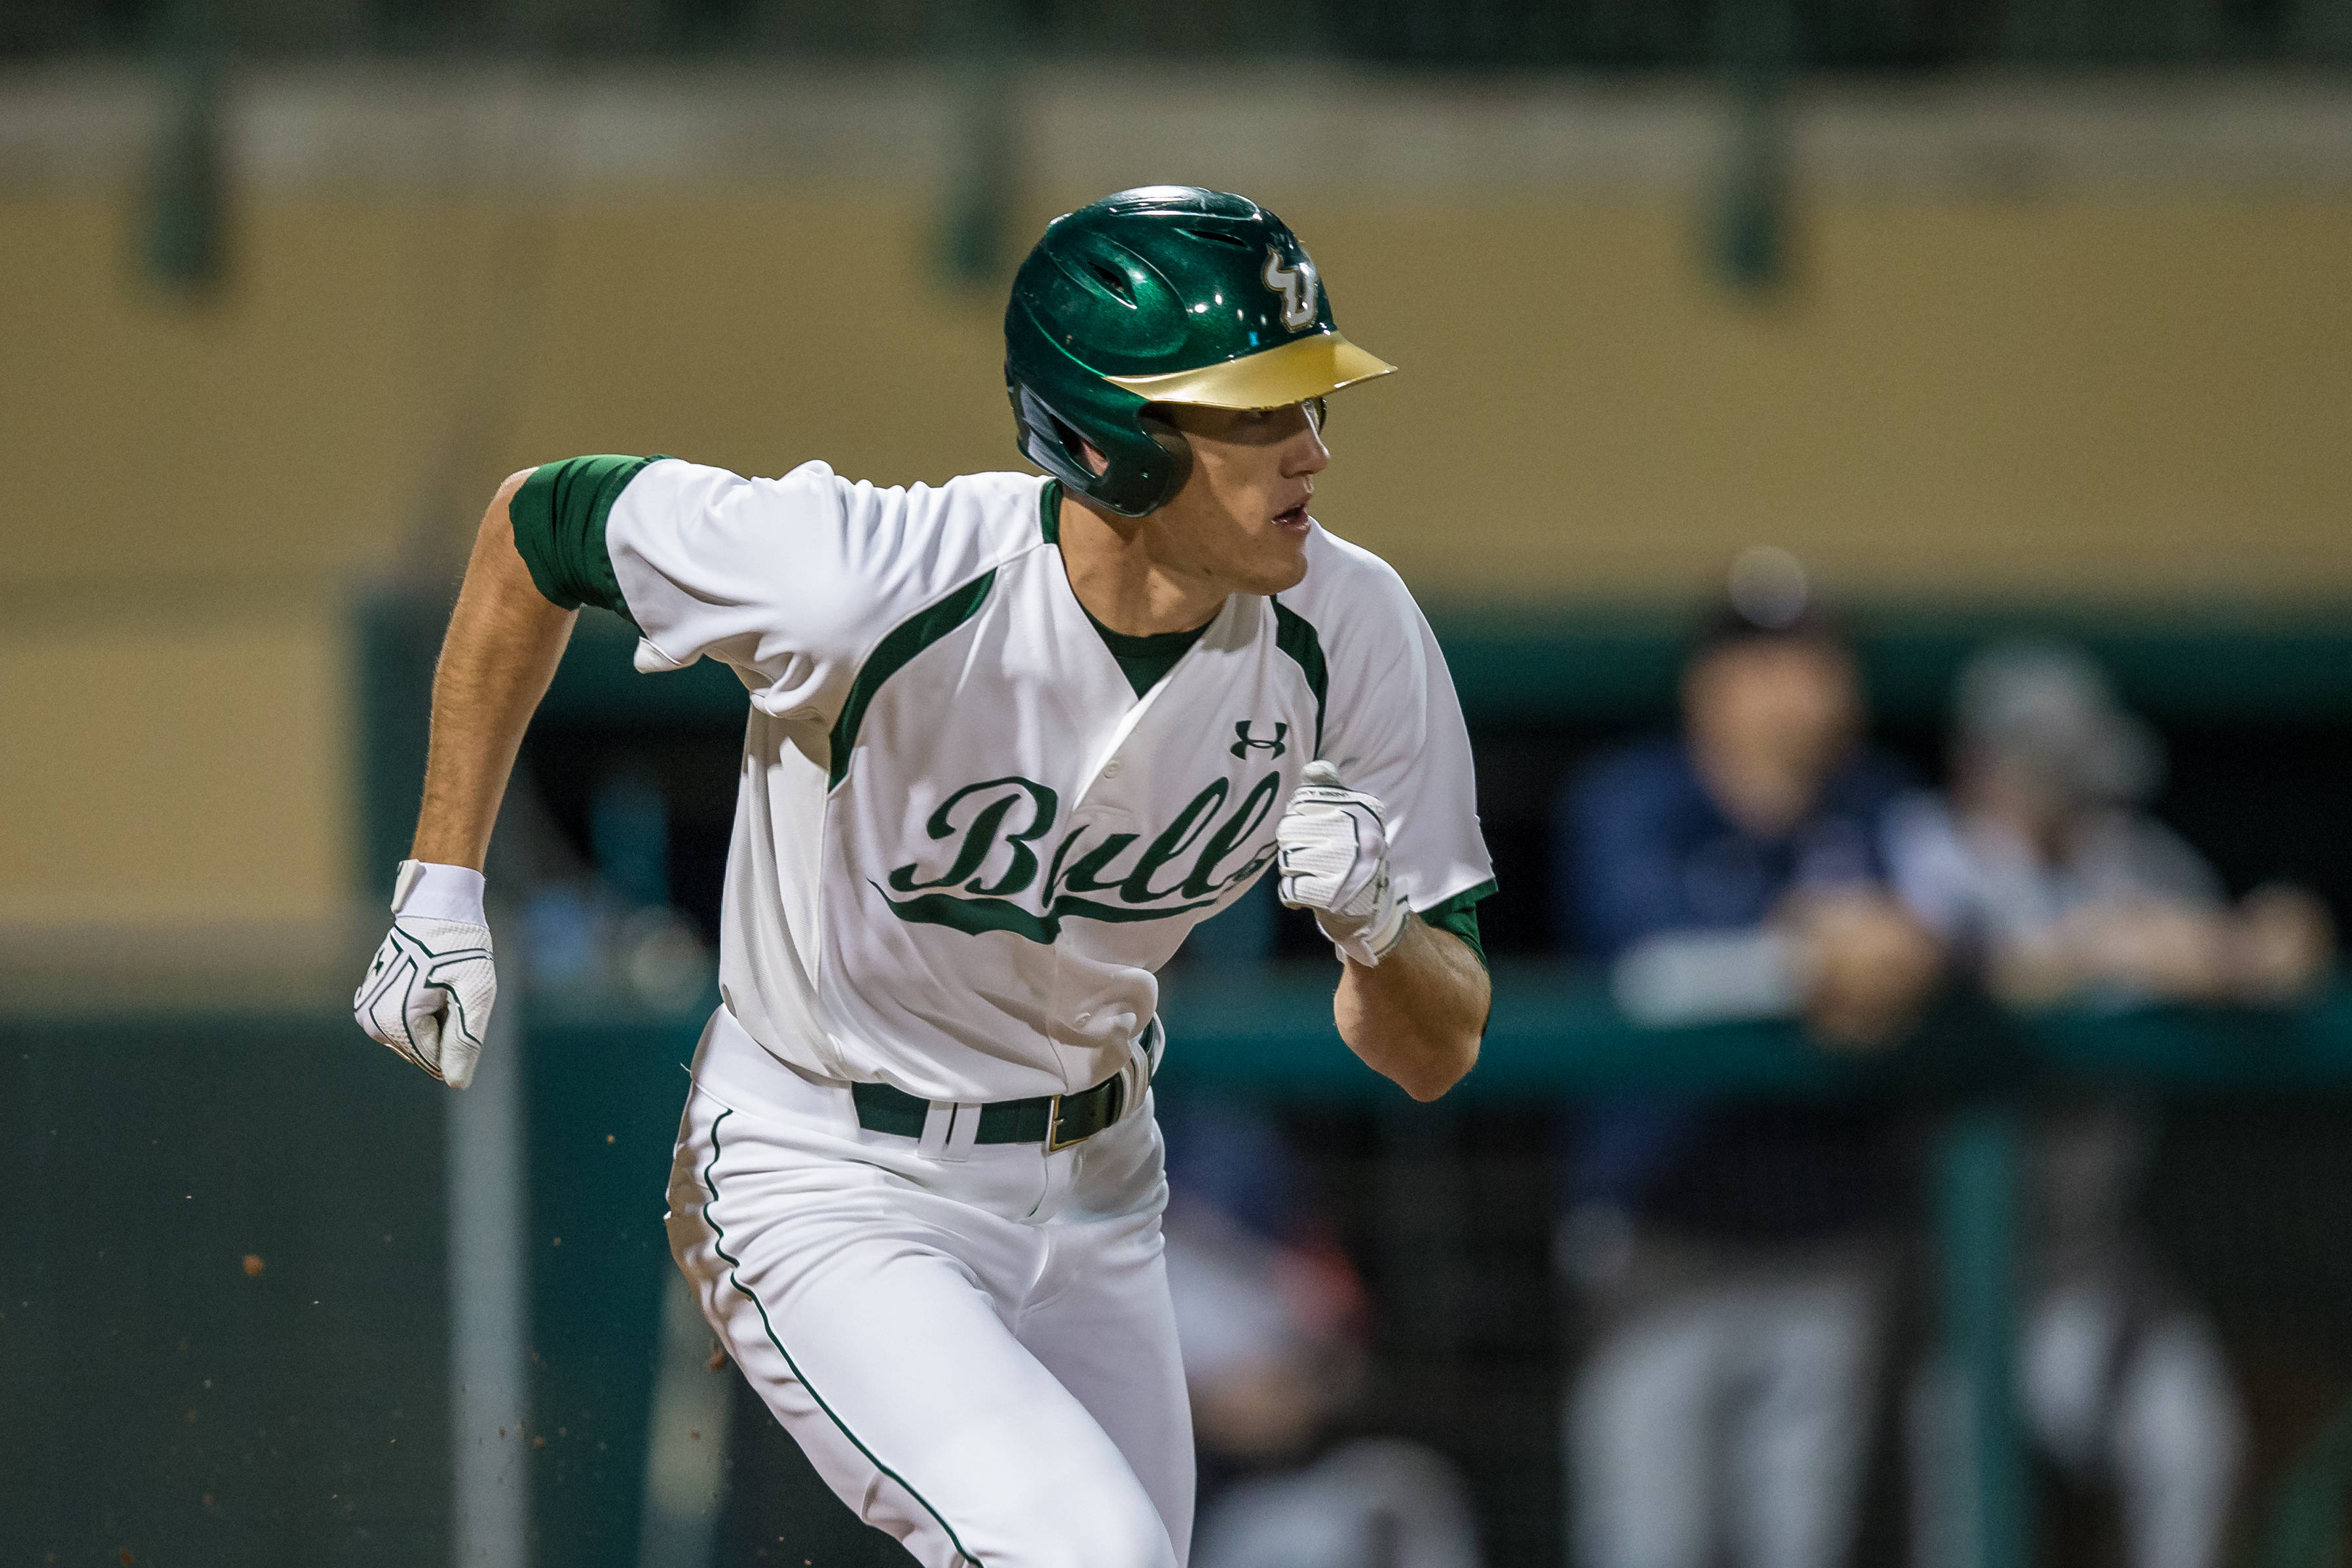 Luke Borders gets a hit vs. UCF on Sunday. The Bulls took two out of three vs. the Knights over the weekend.